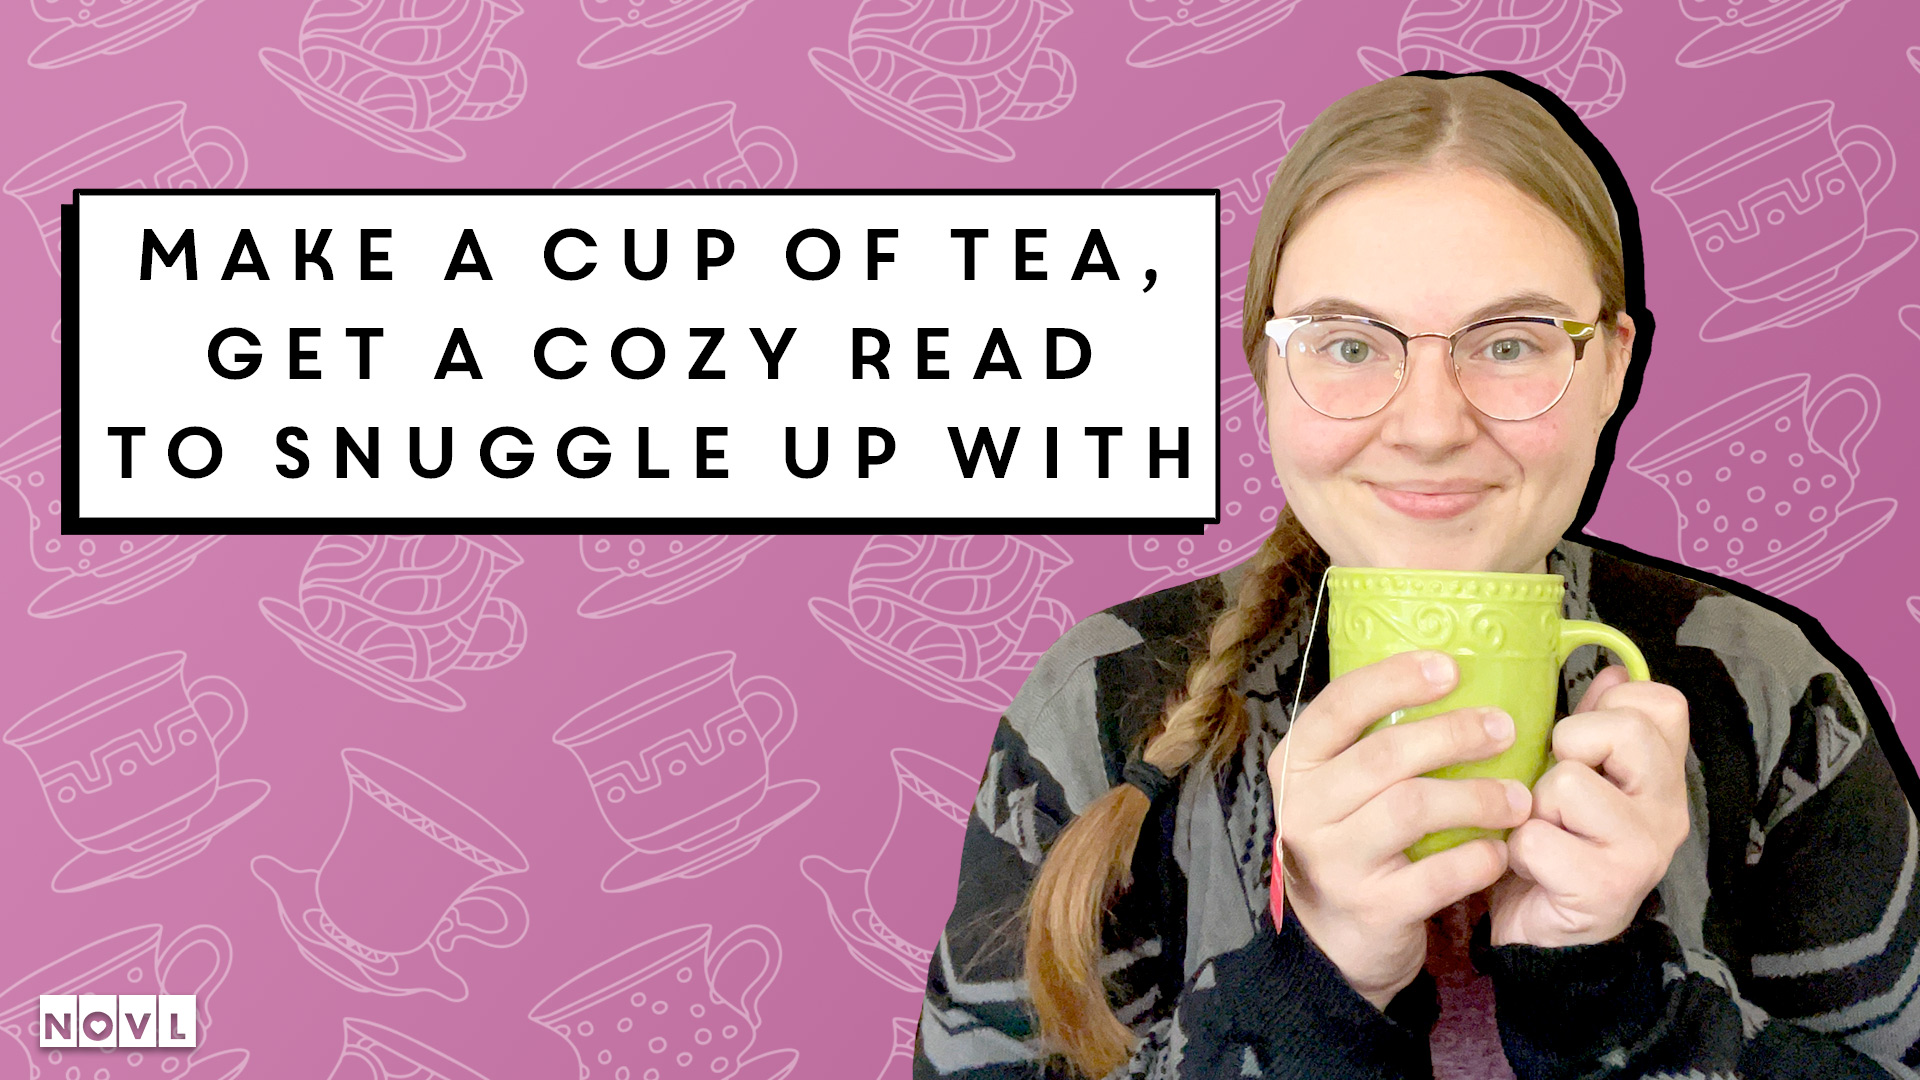 The NOVL Blog, Featured Image for Article: Make a Cup of Tea, Get a Cozy Read to Snuggle Up With